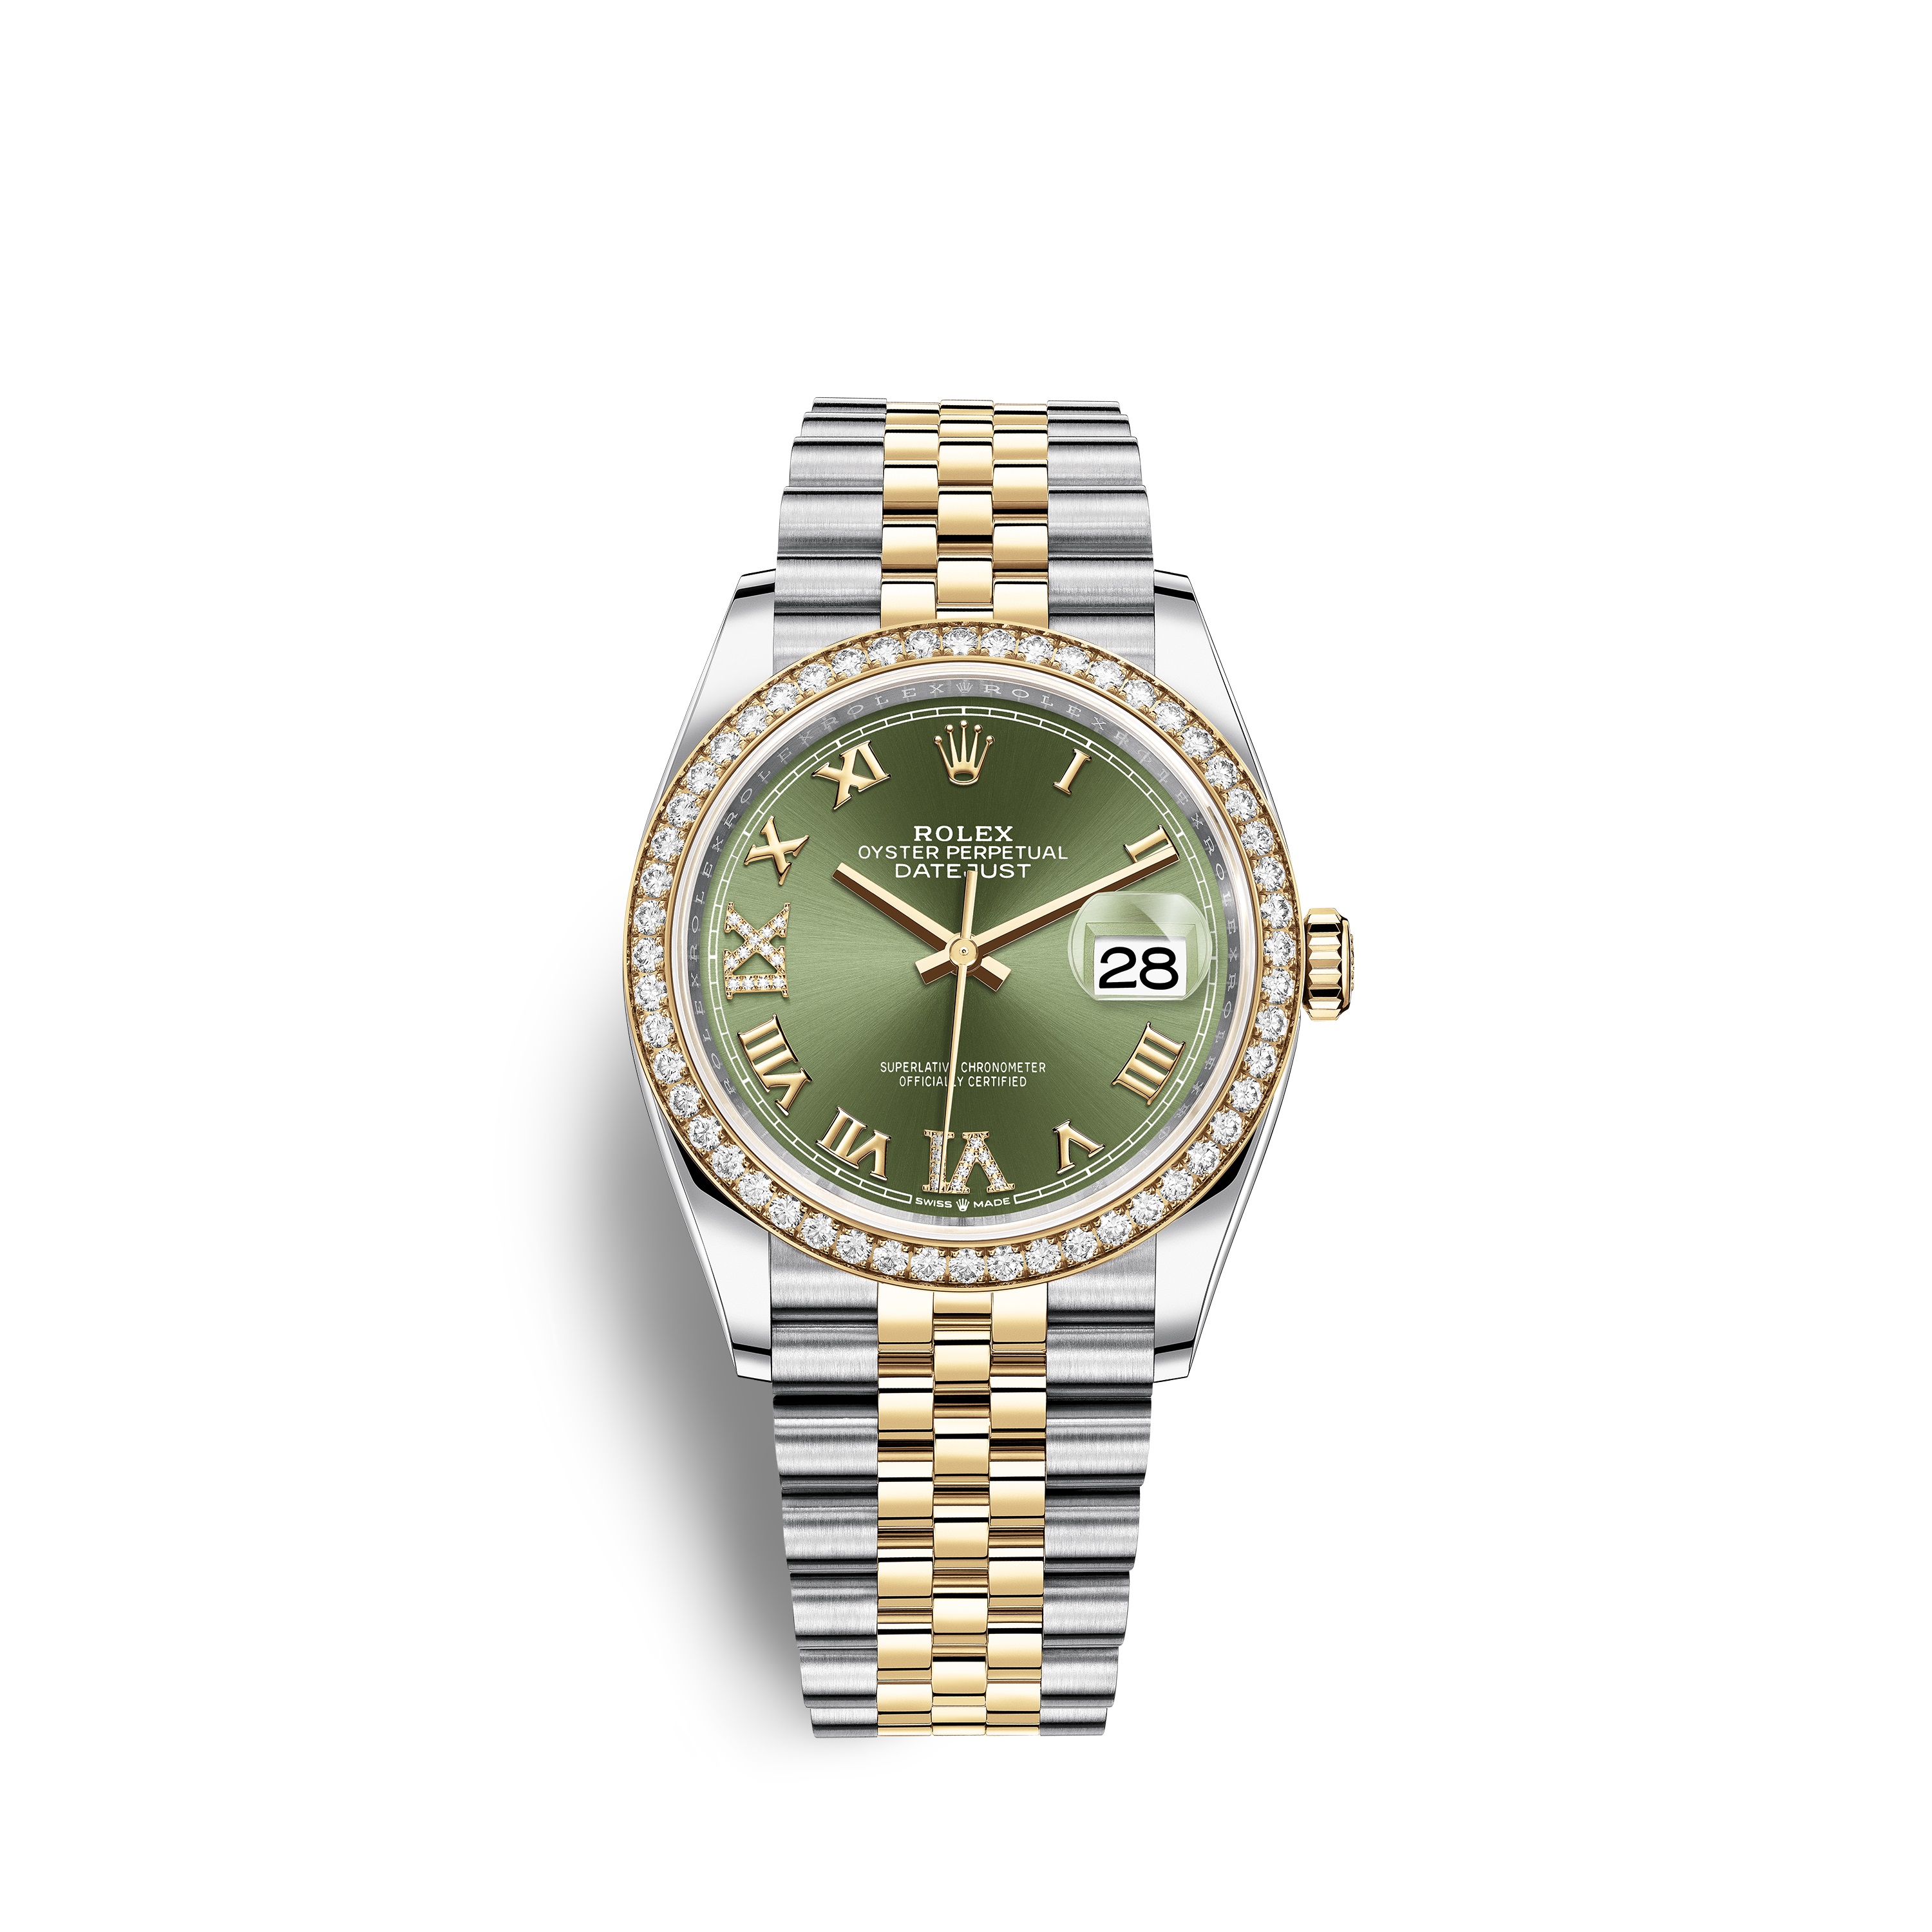 Datejust 36 126283RBR Gold & Stainless Steel Watch (Olive Green Set with Diamonds) - Click Image to Close